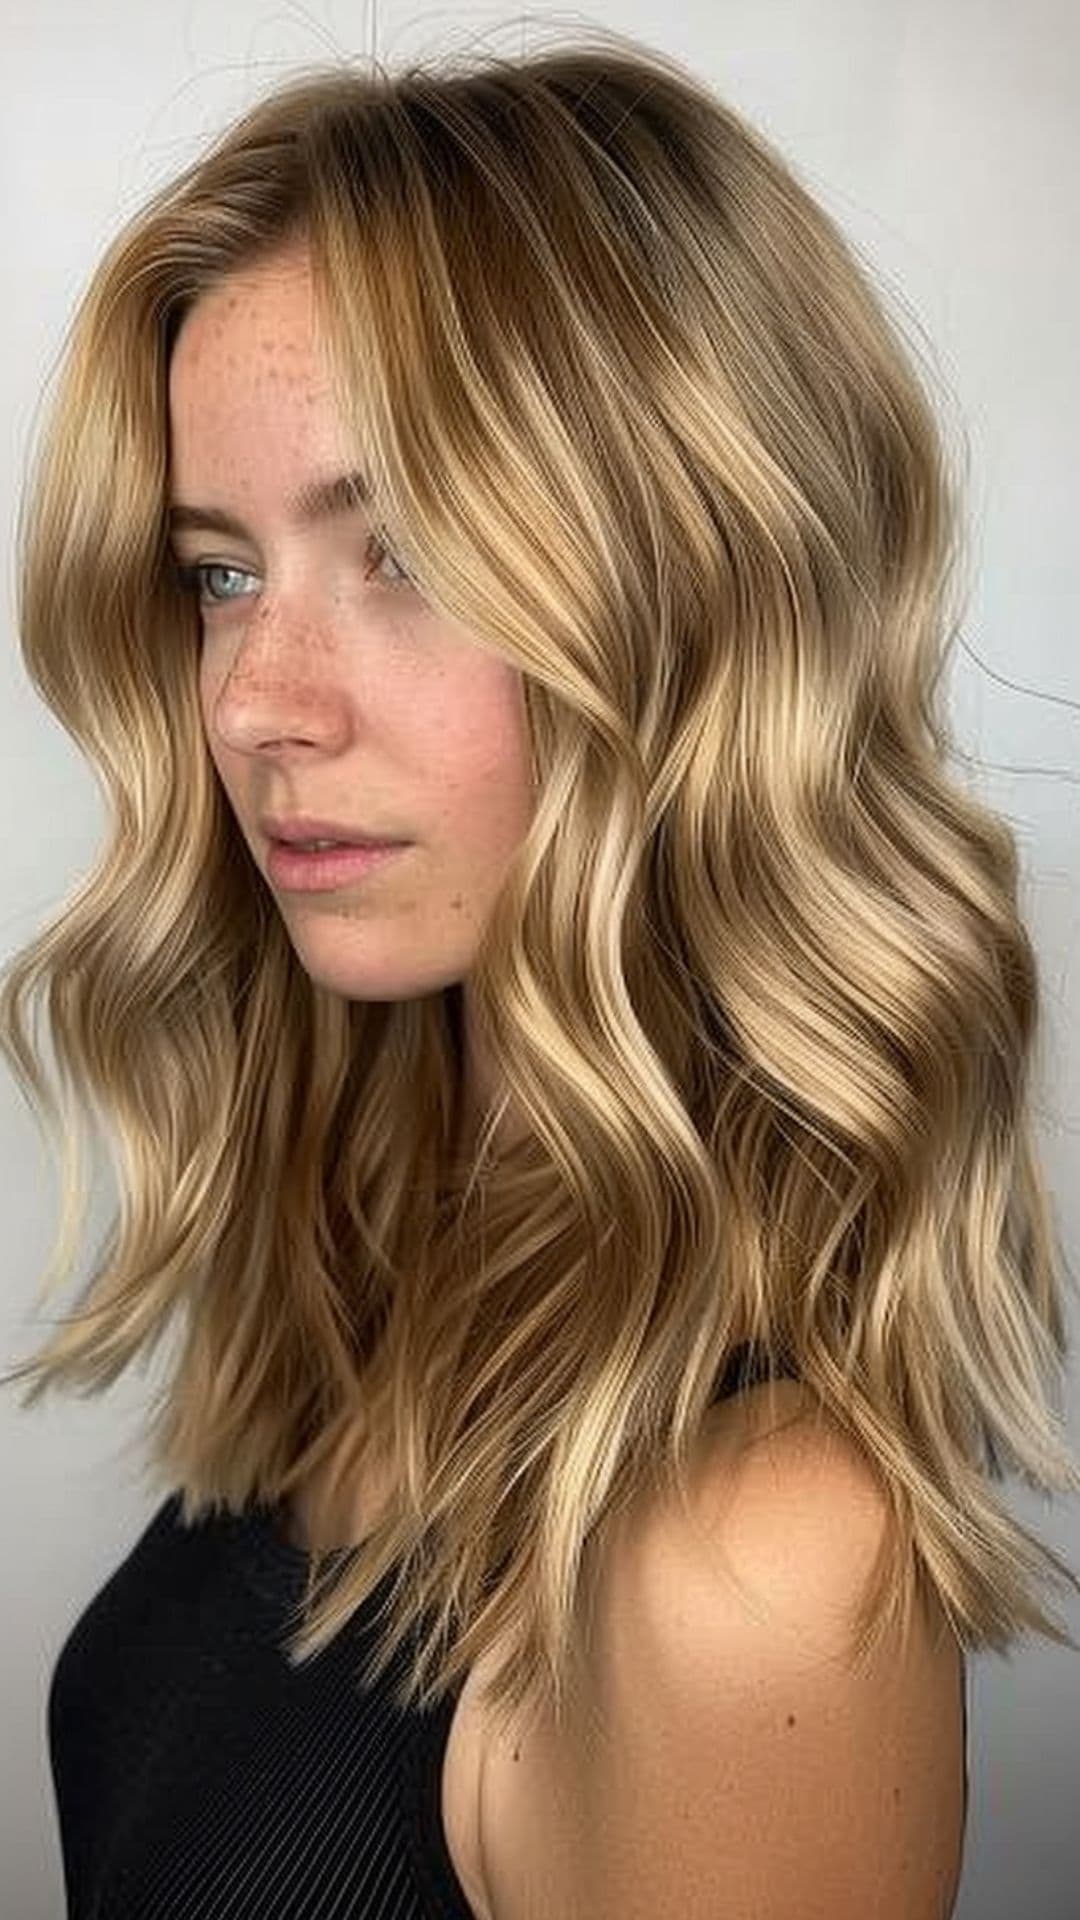 A woman modelling a sun-kissed blonde highlights.